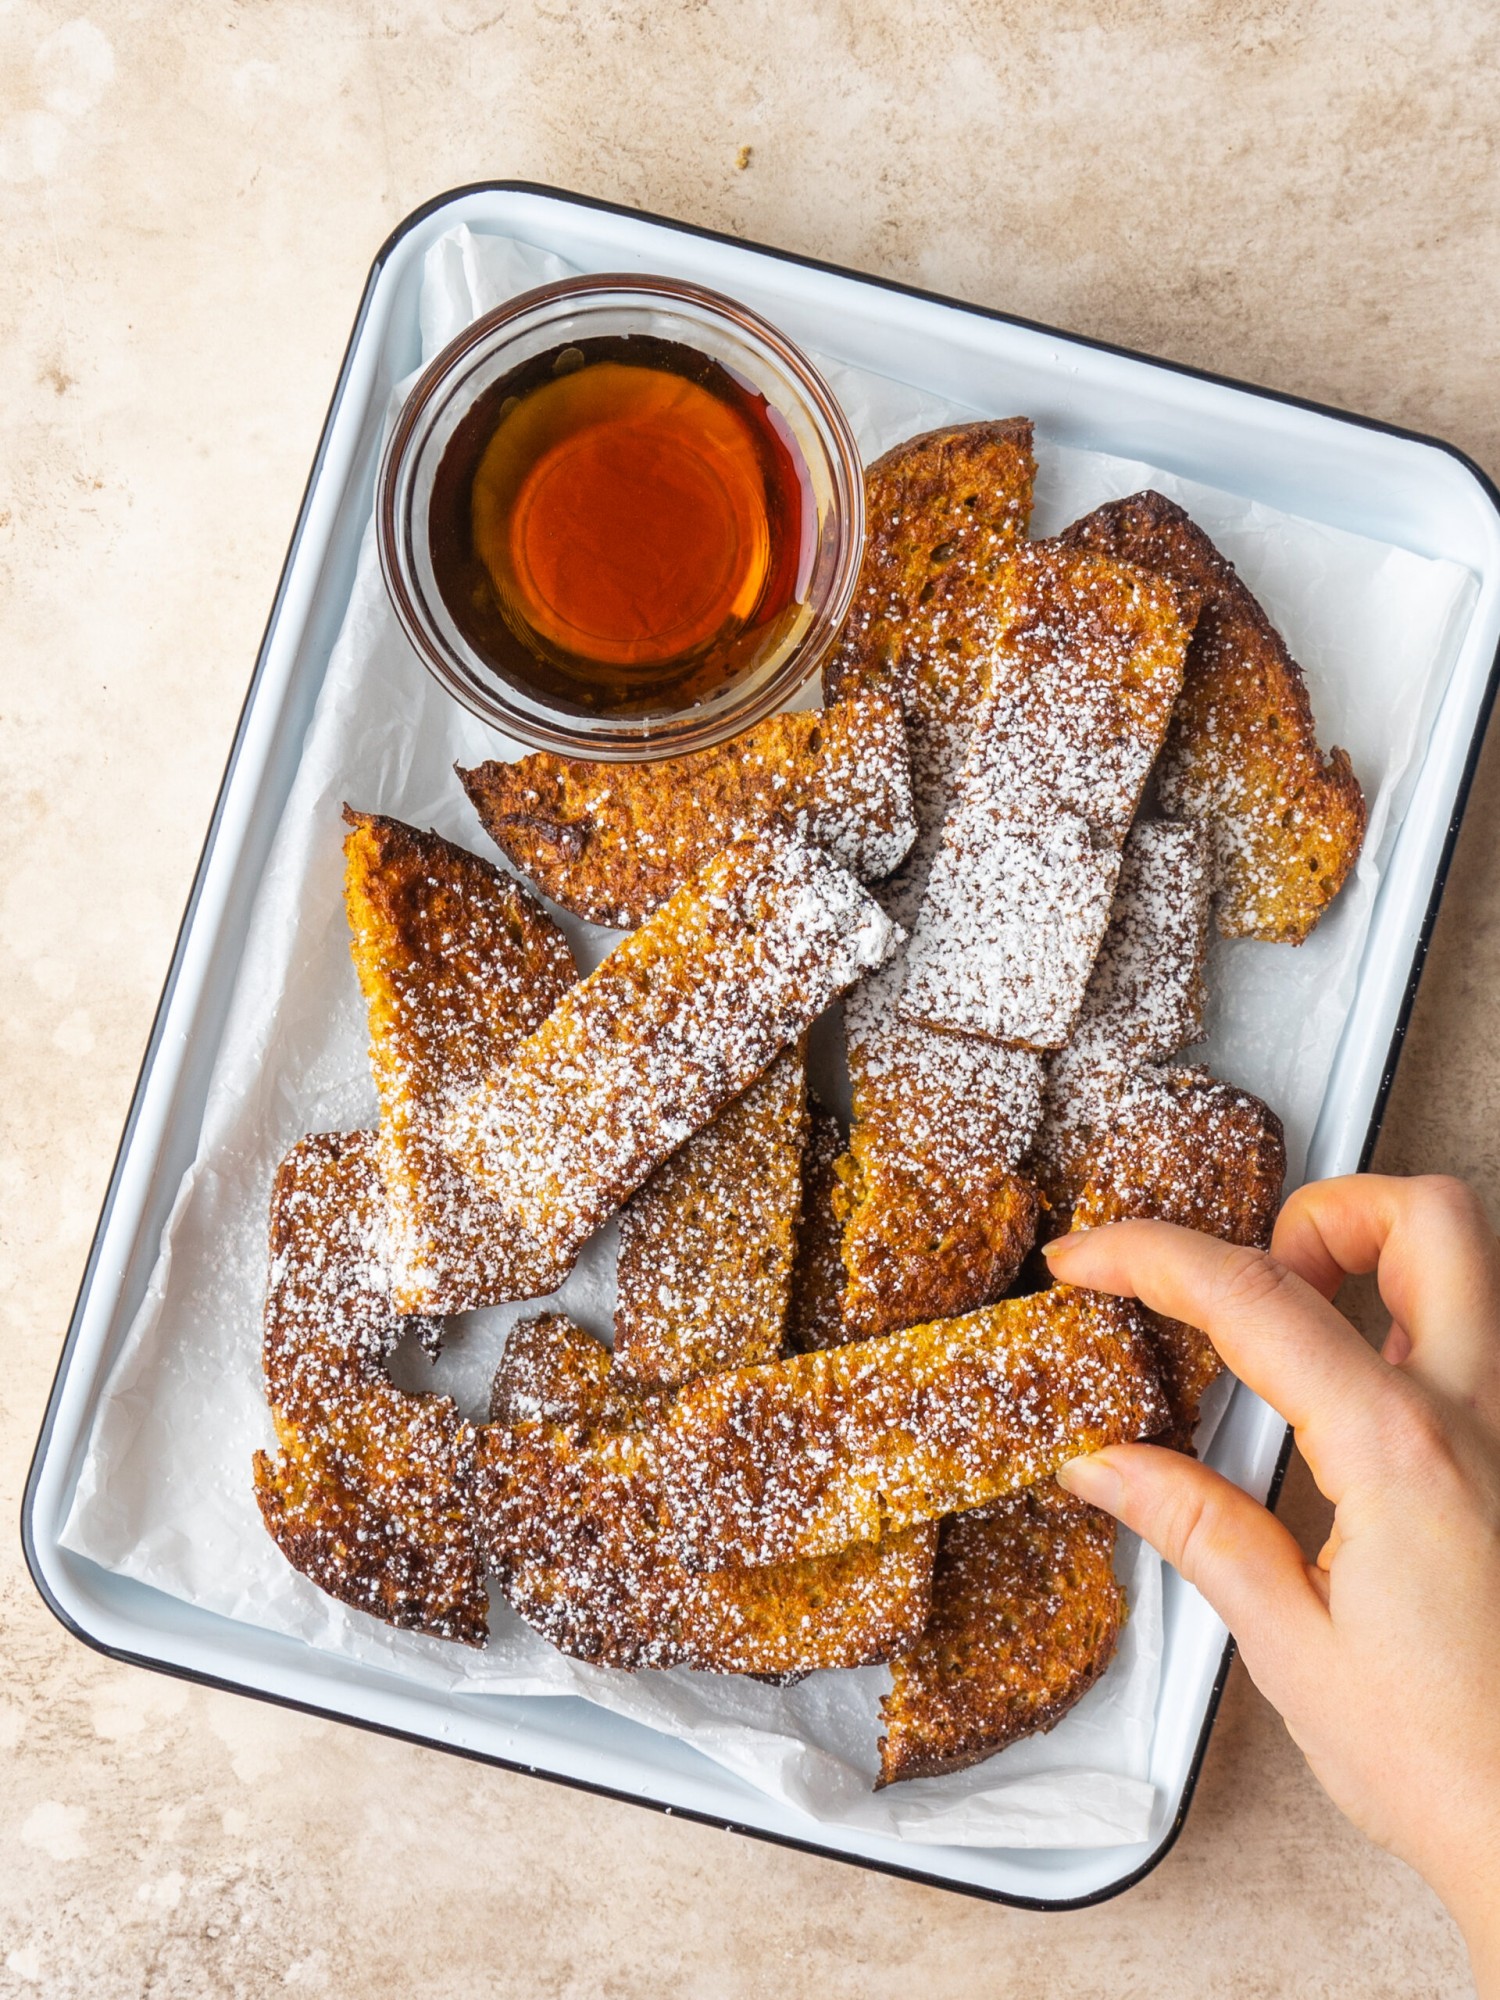 an above picture of a hand holding a french toast stick over a baking sheet filled with french toast sticks and dusted with powdered sugar